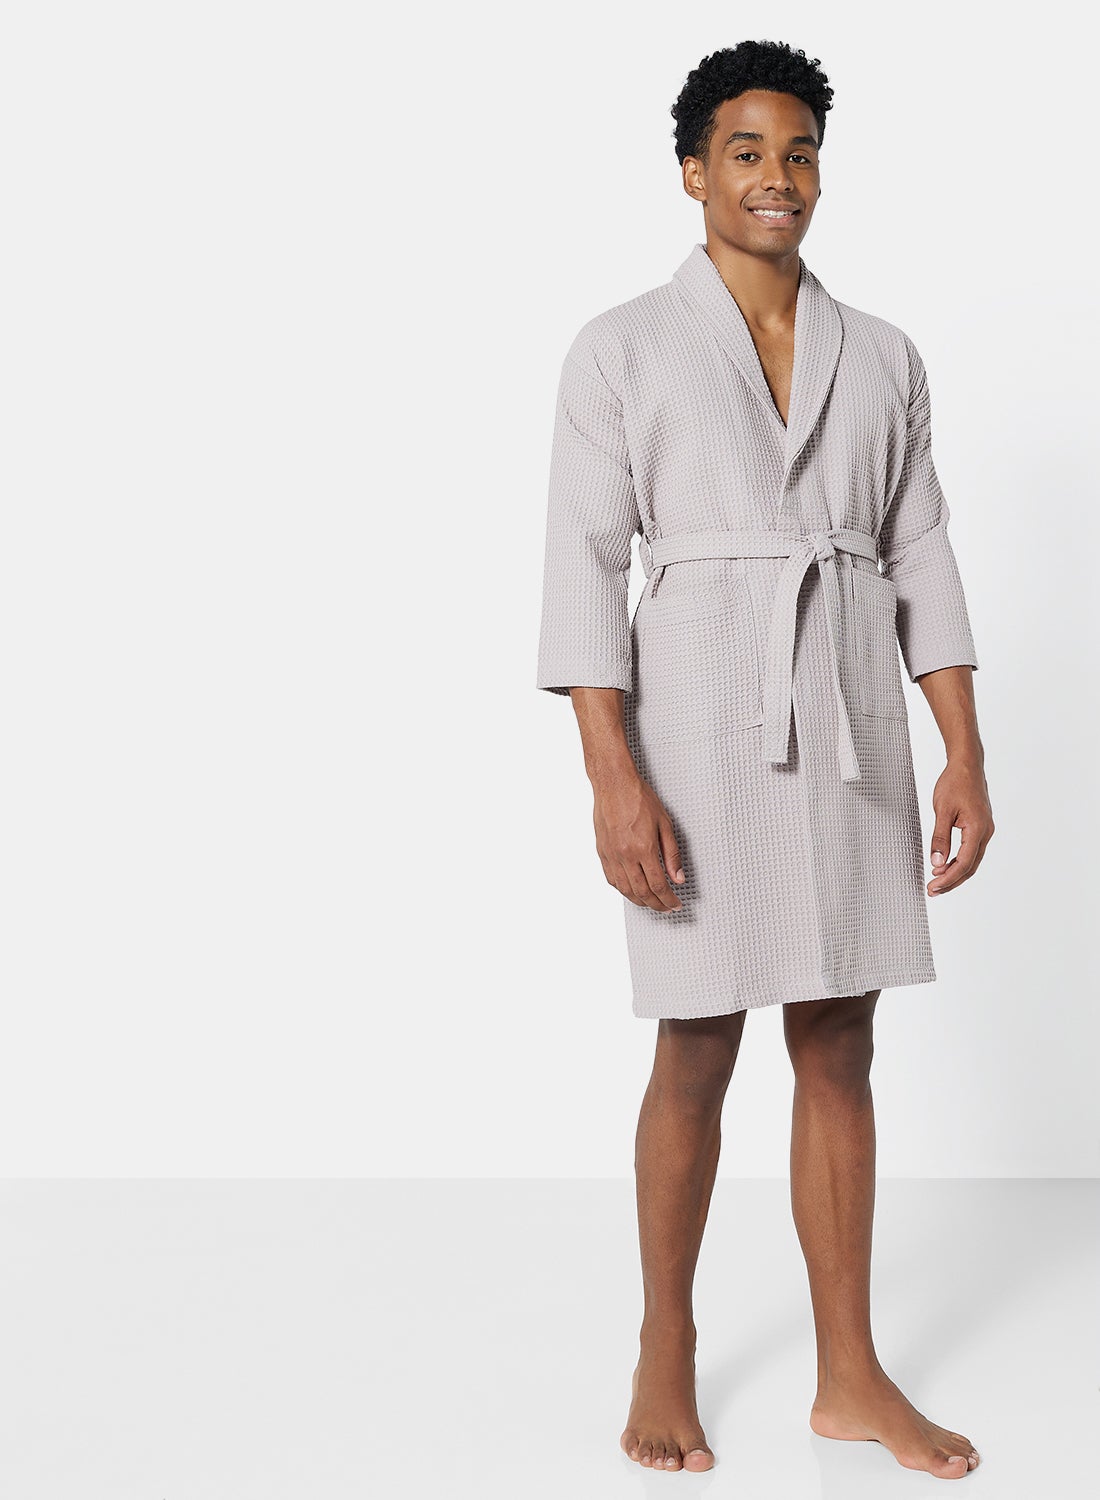 Bathrobe - 280 GSM 100% Cotton Waffle Quick Dry And Lightweight - Shawl Collar & Pocket - Silver Grey Color - 1 Piece 